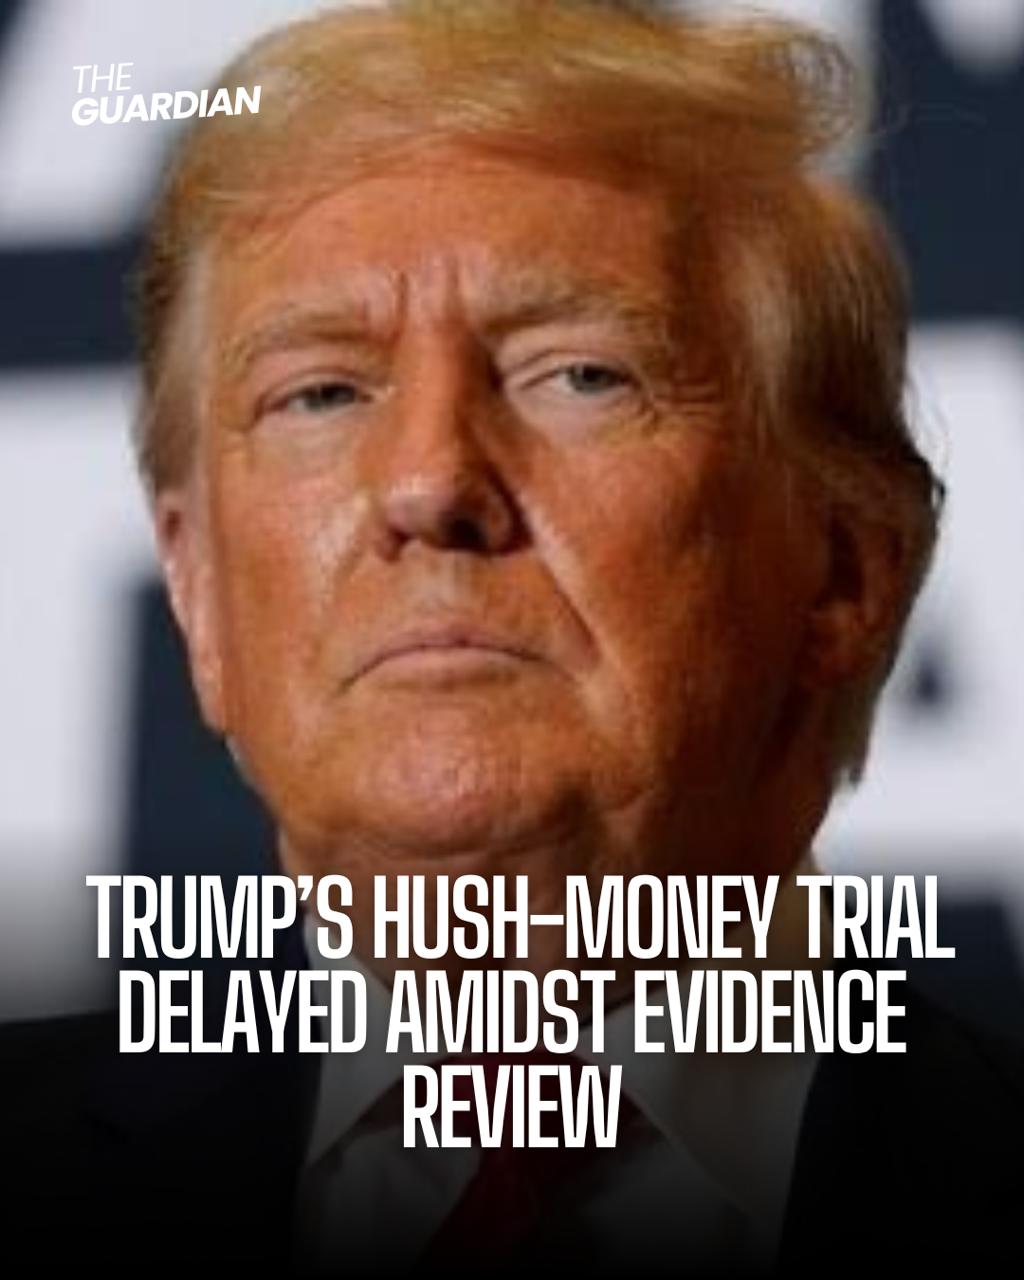 The judge decided to delay for a month after Trump's attorneys said they required more time to sift through newly released records.